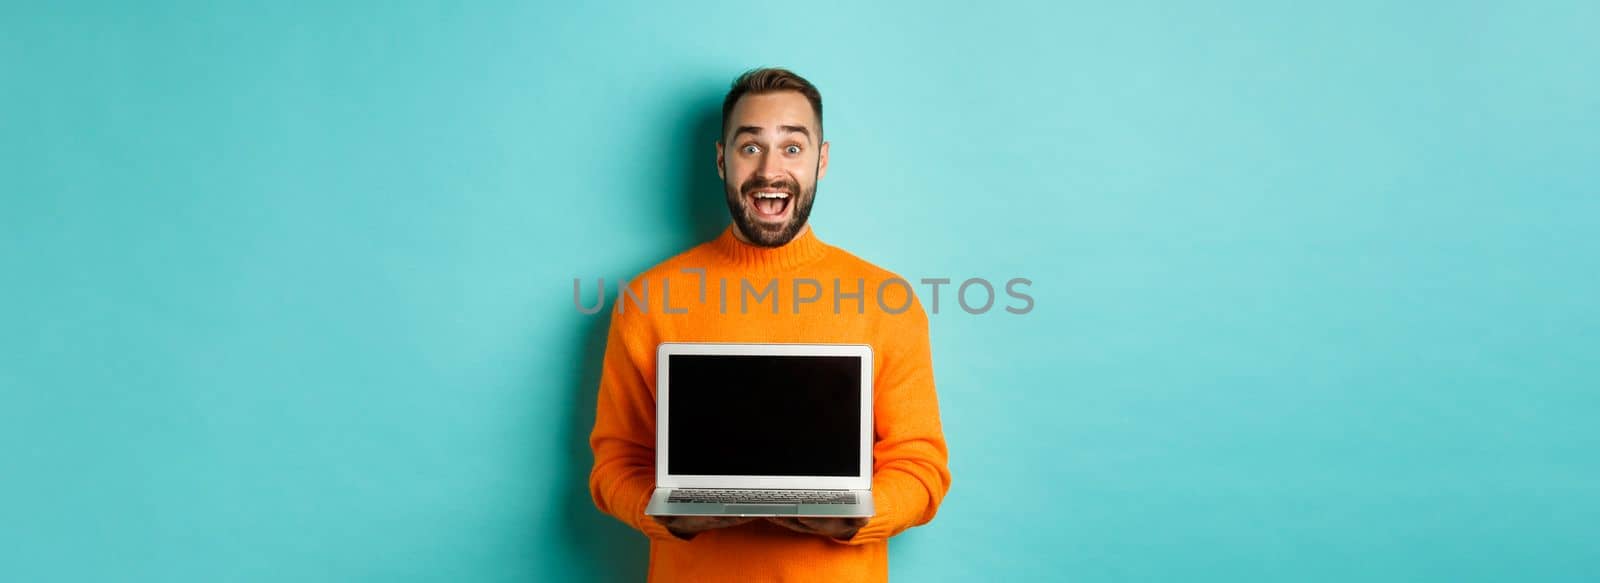 Handsome bearded man in orange sweater showing laptop screen, demonstrating promo, standing over light blue background.